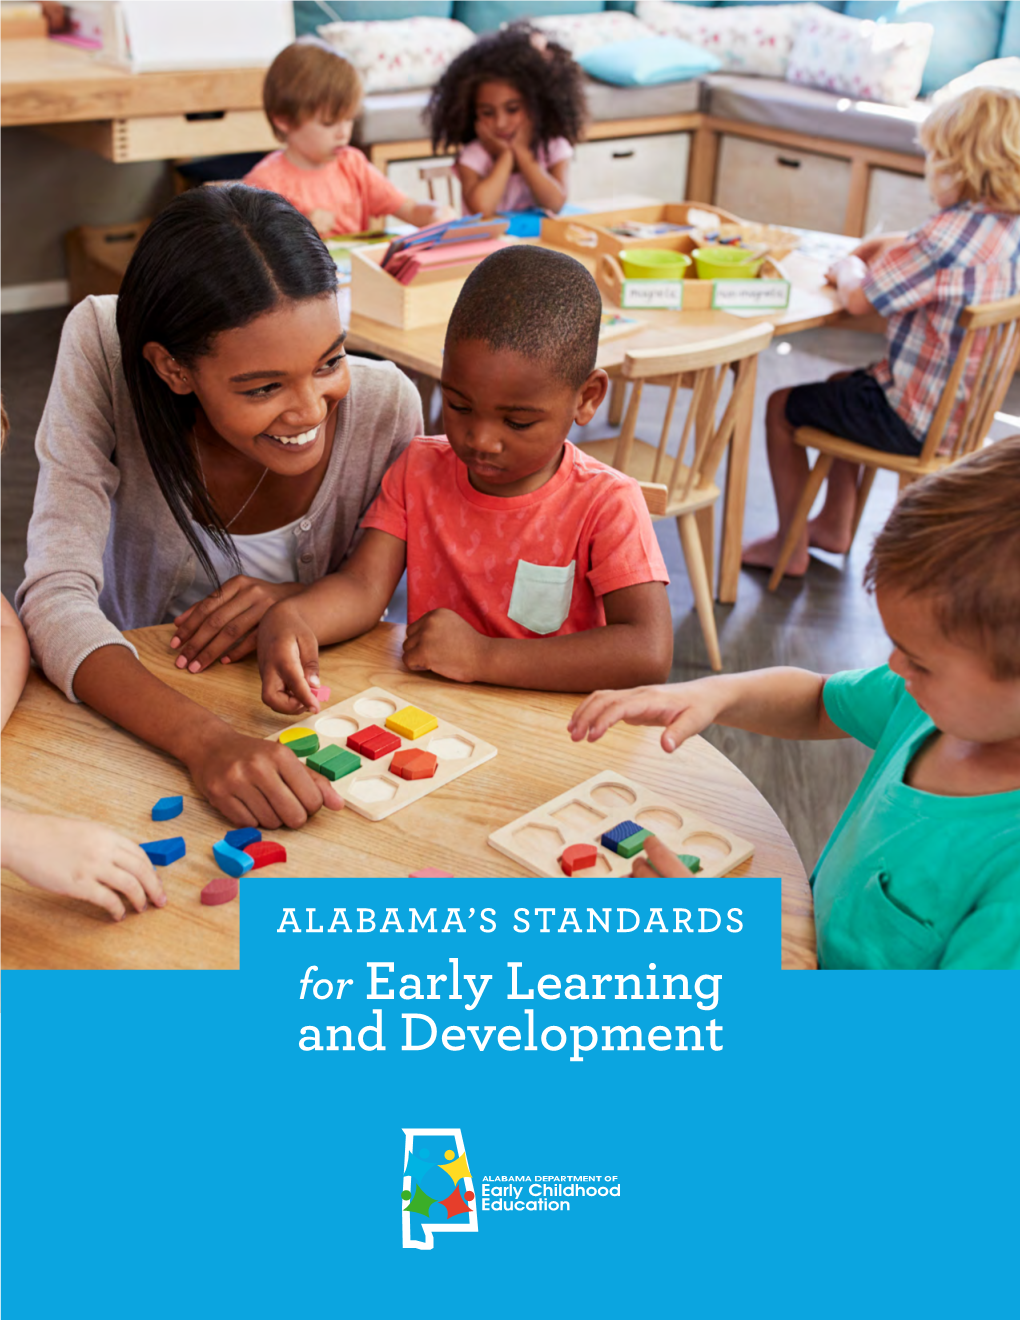 For Early Learning and Development